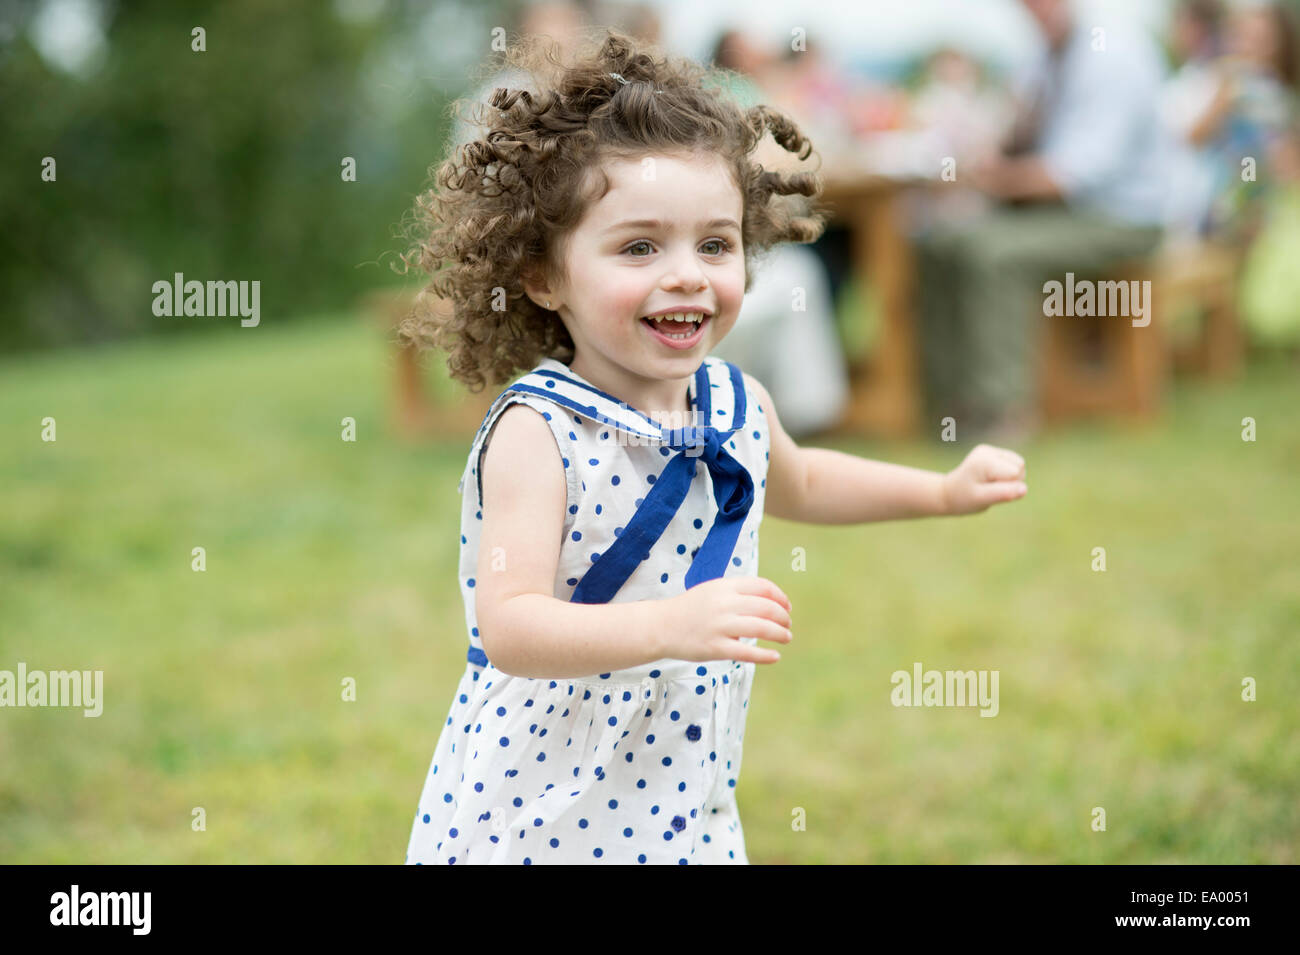 Young girl running and playing at family gathering Stock Photo